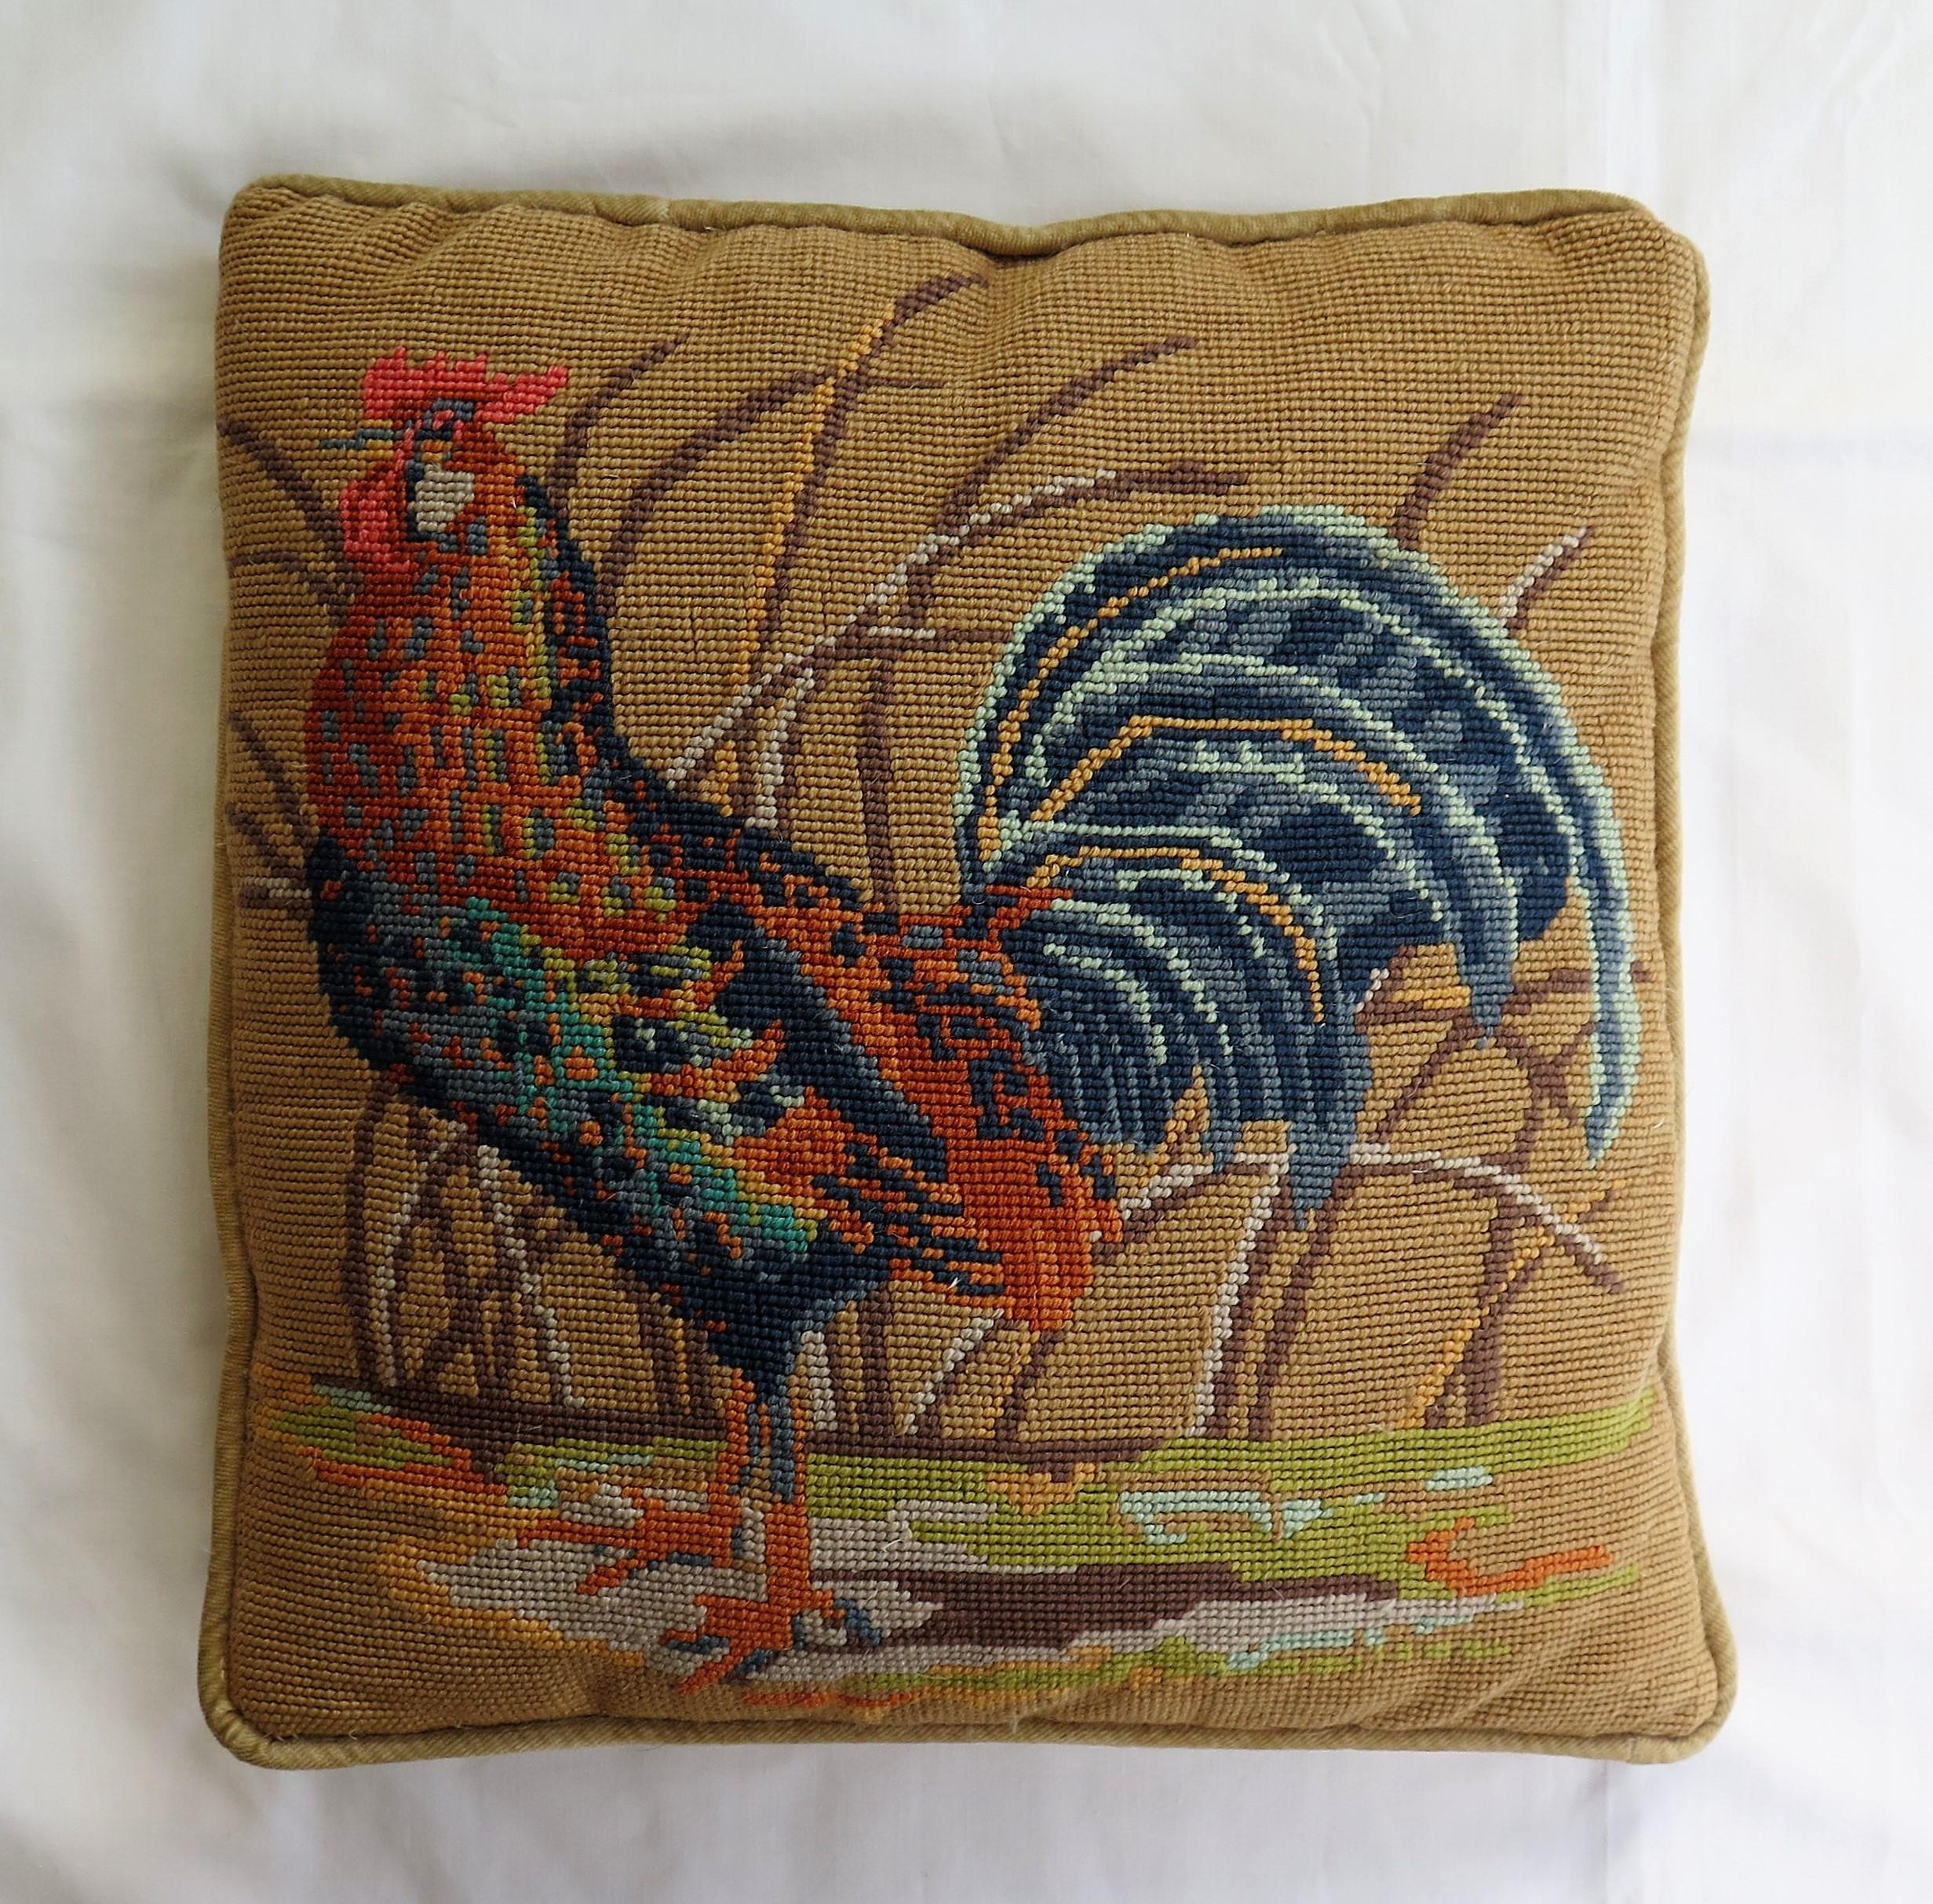 This is a mid size, English, needlepoint tapestry cushion or pillow with a distinctive country style design of a rooster or cockerel, which we date to the early or mid-20th century. 

The hand worked design shows a rooster or cockerel standing